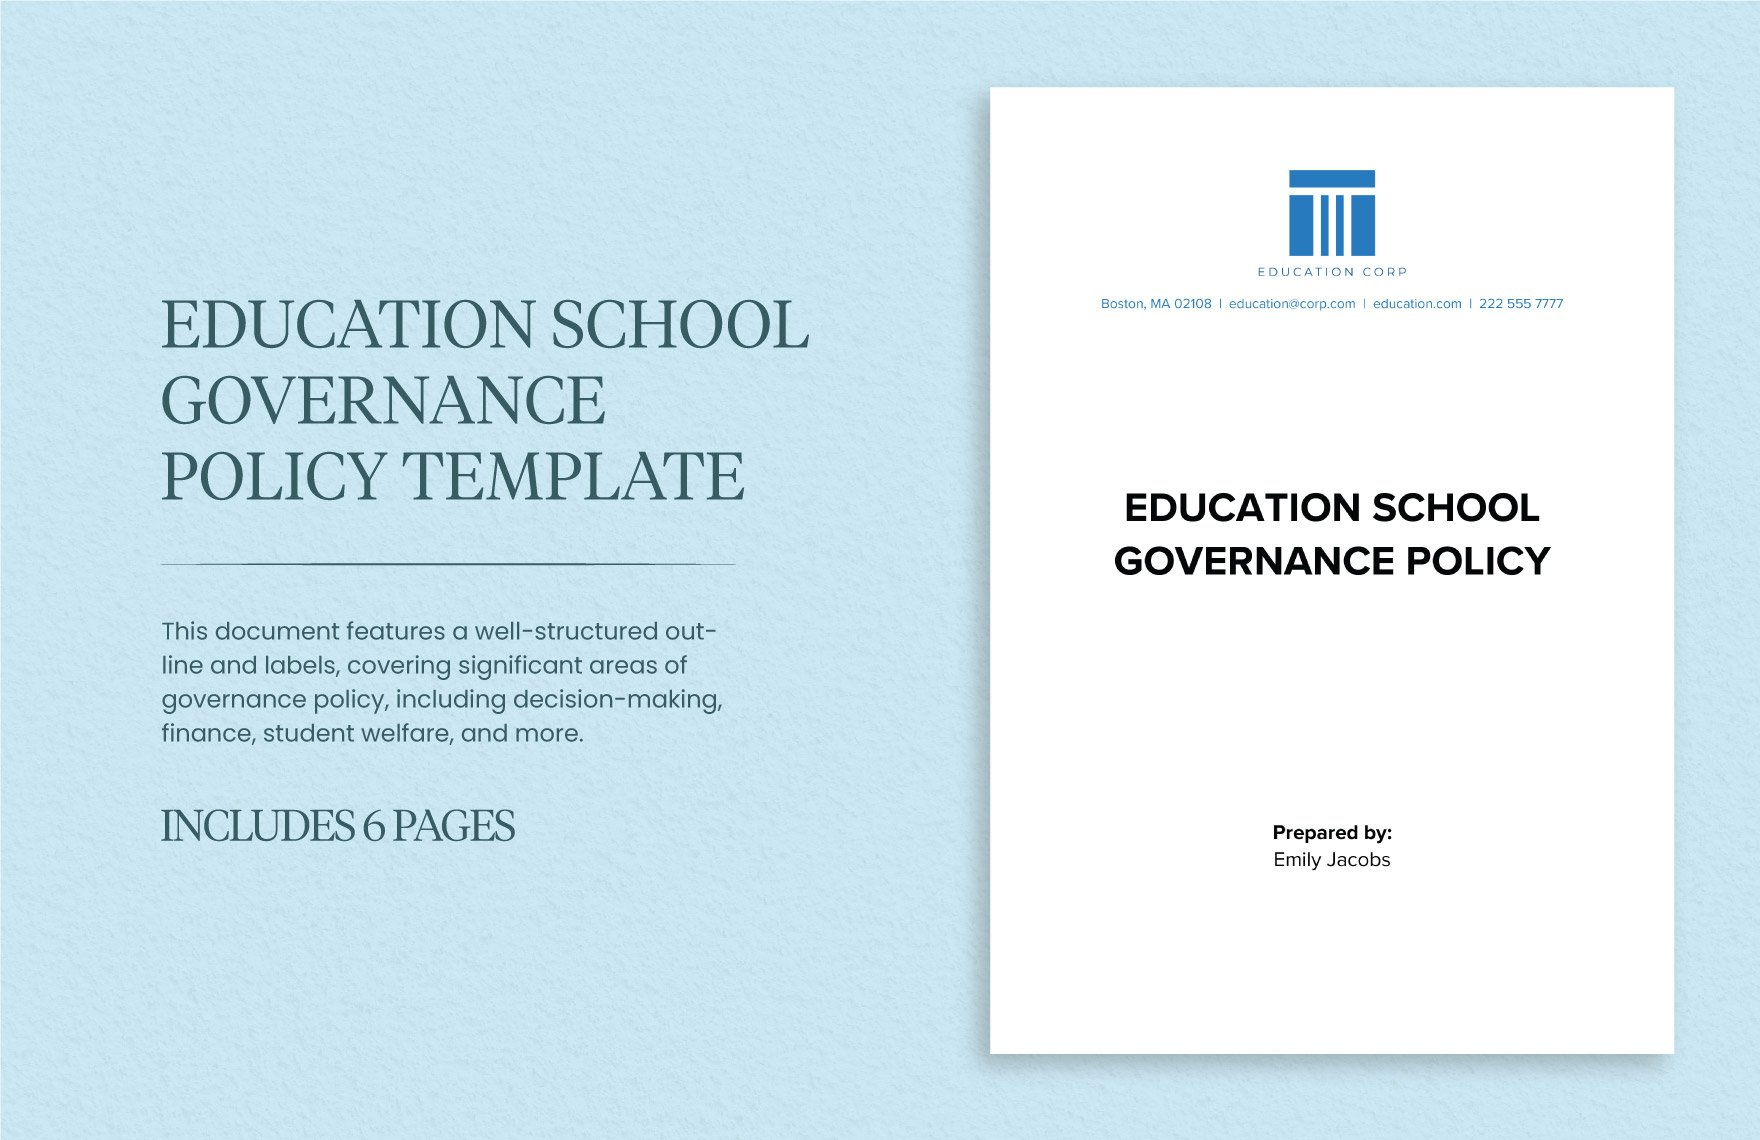 Education School Governance Policy Template in Word, Google Docs, PDF